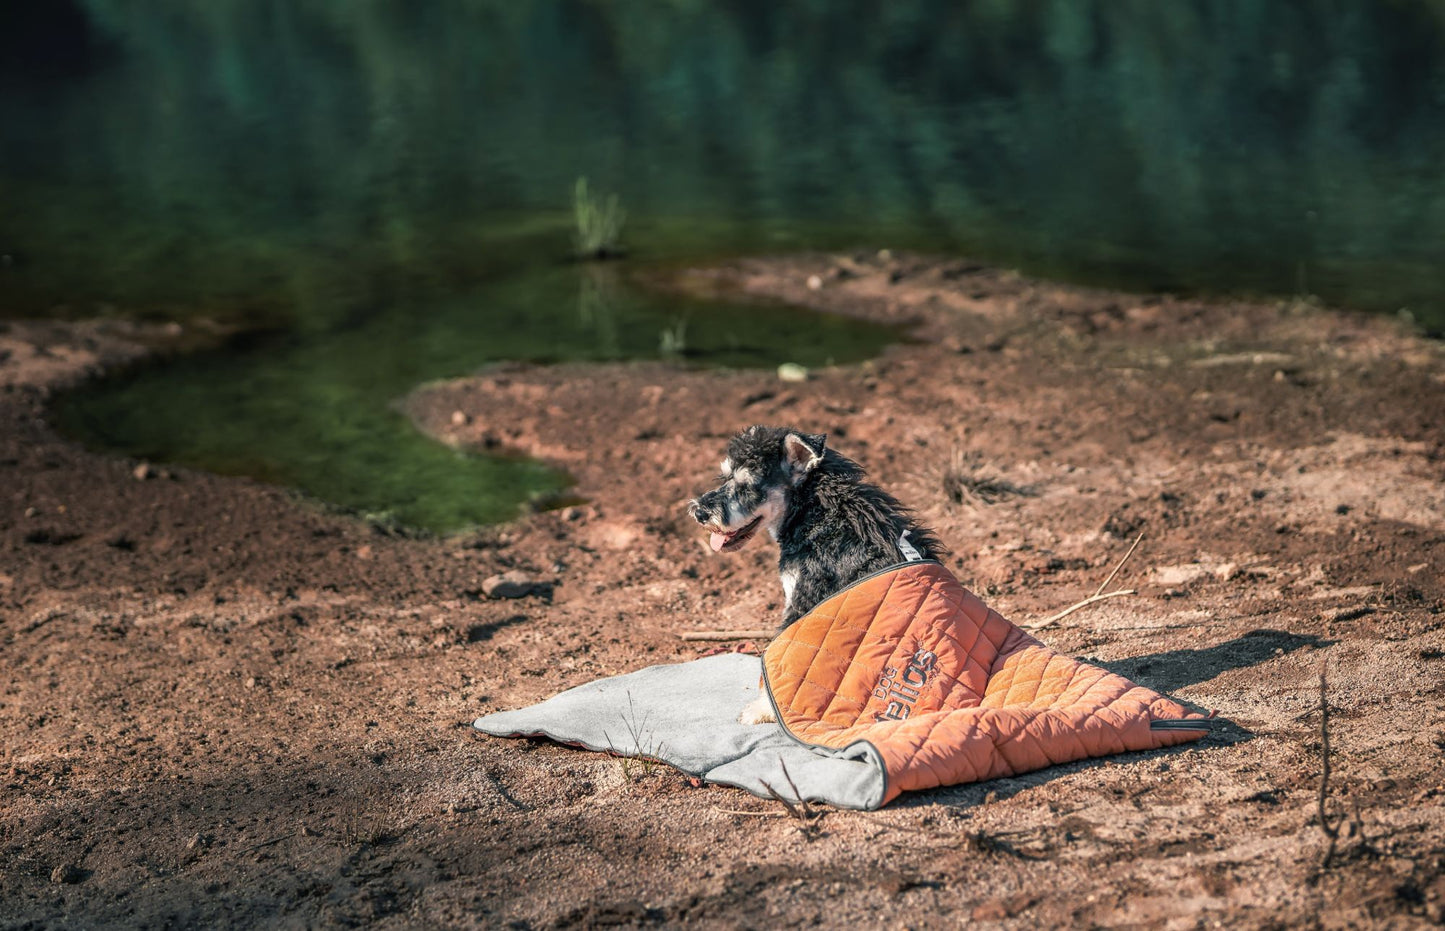 3-in-1 Expandable Travel/Camping Dog Mat